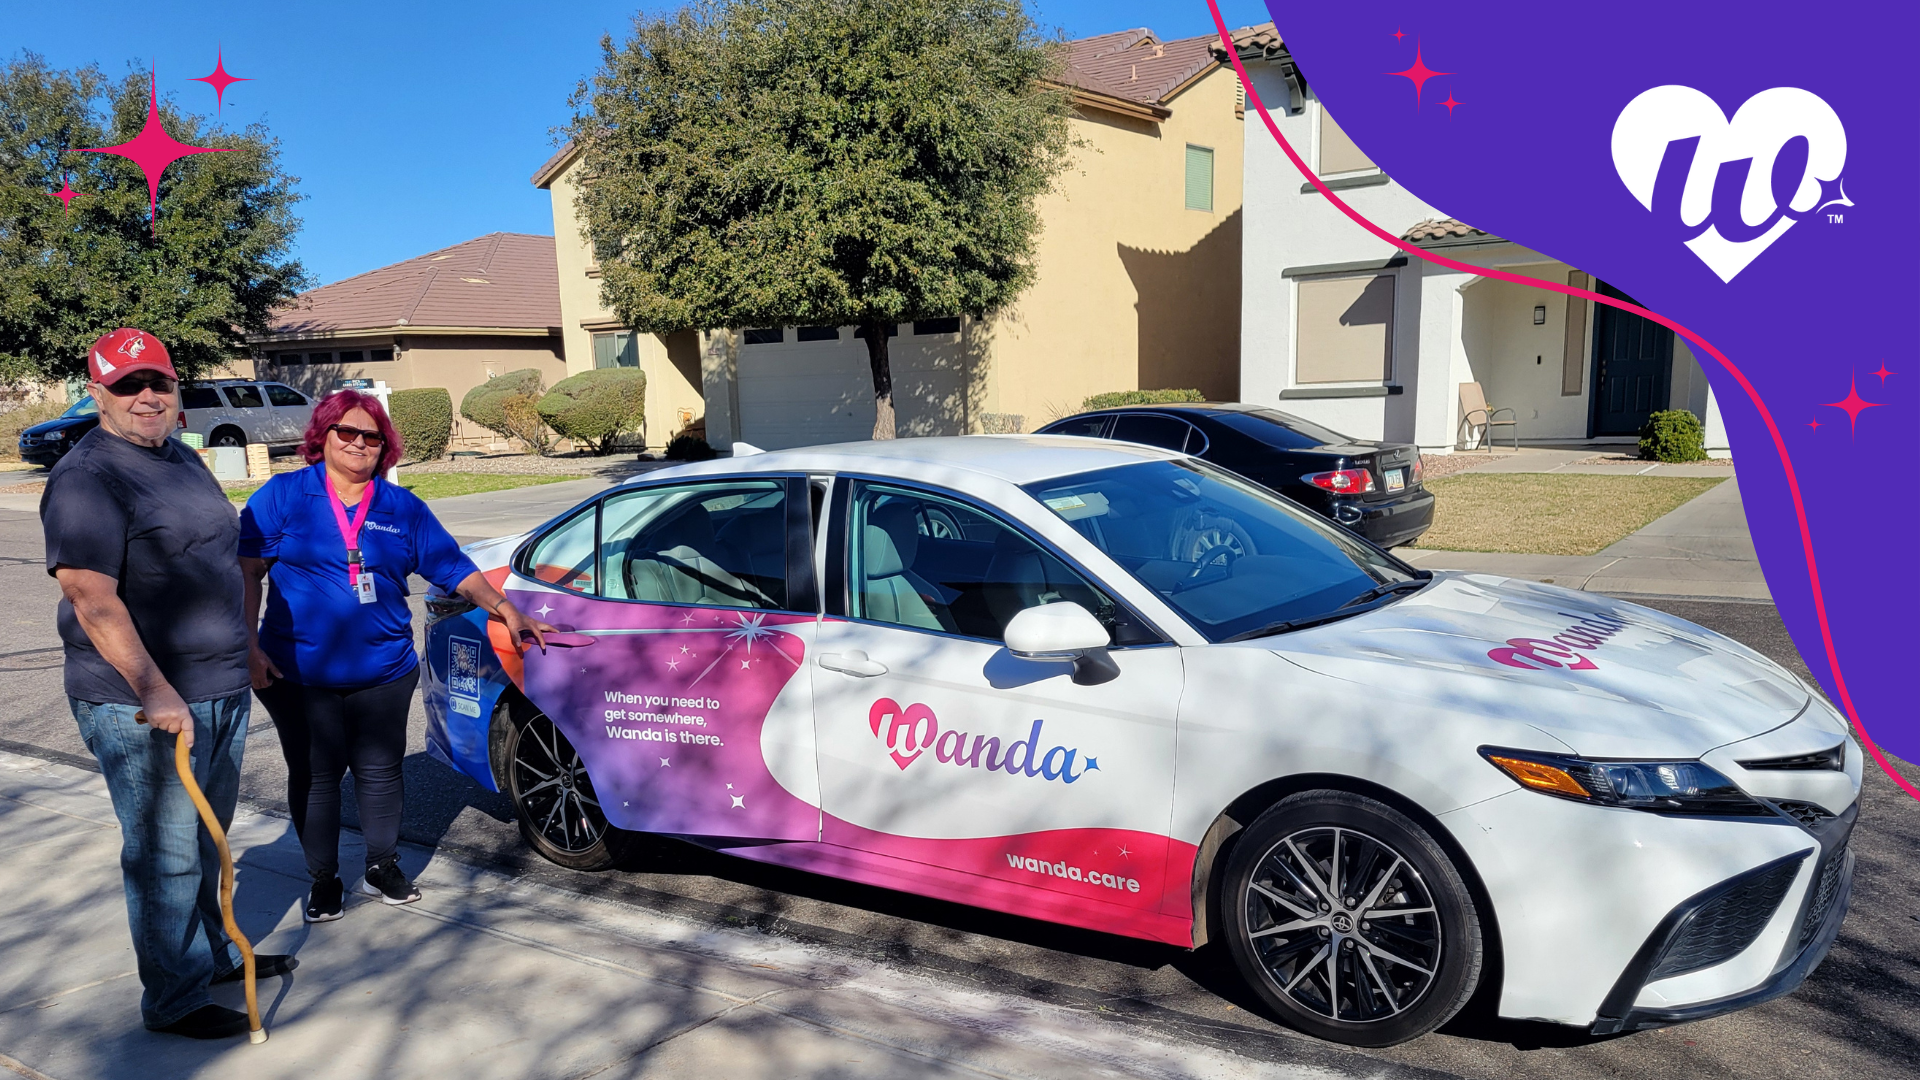 Ready to ride with Wanda? Check out these tips to help you prepare, choose the right transportation service, and stay safe as you navigate Phoenix.